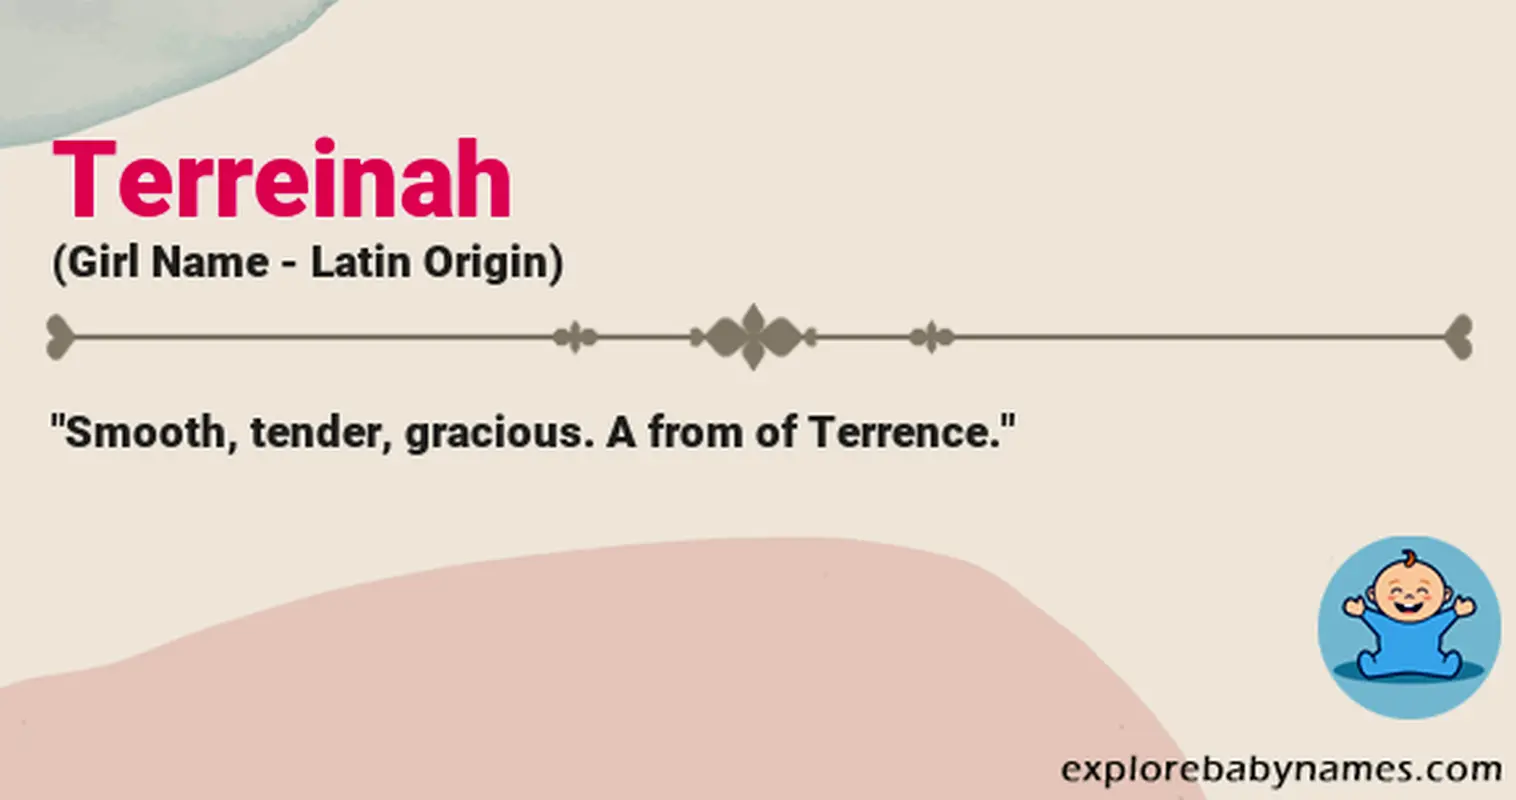 Meaning of Terreinah